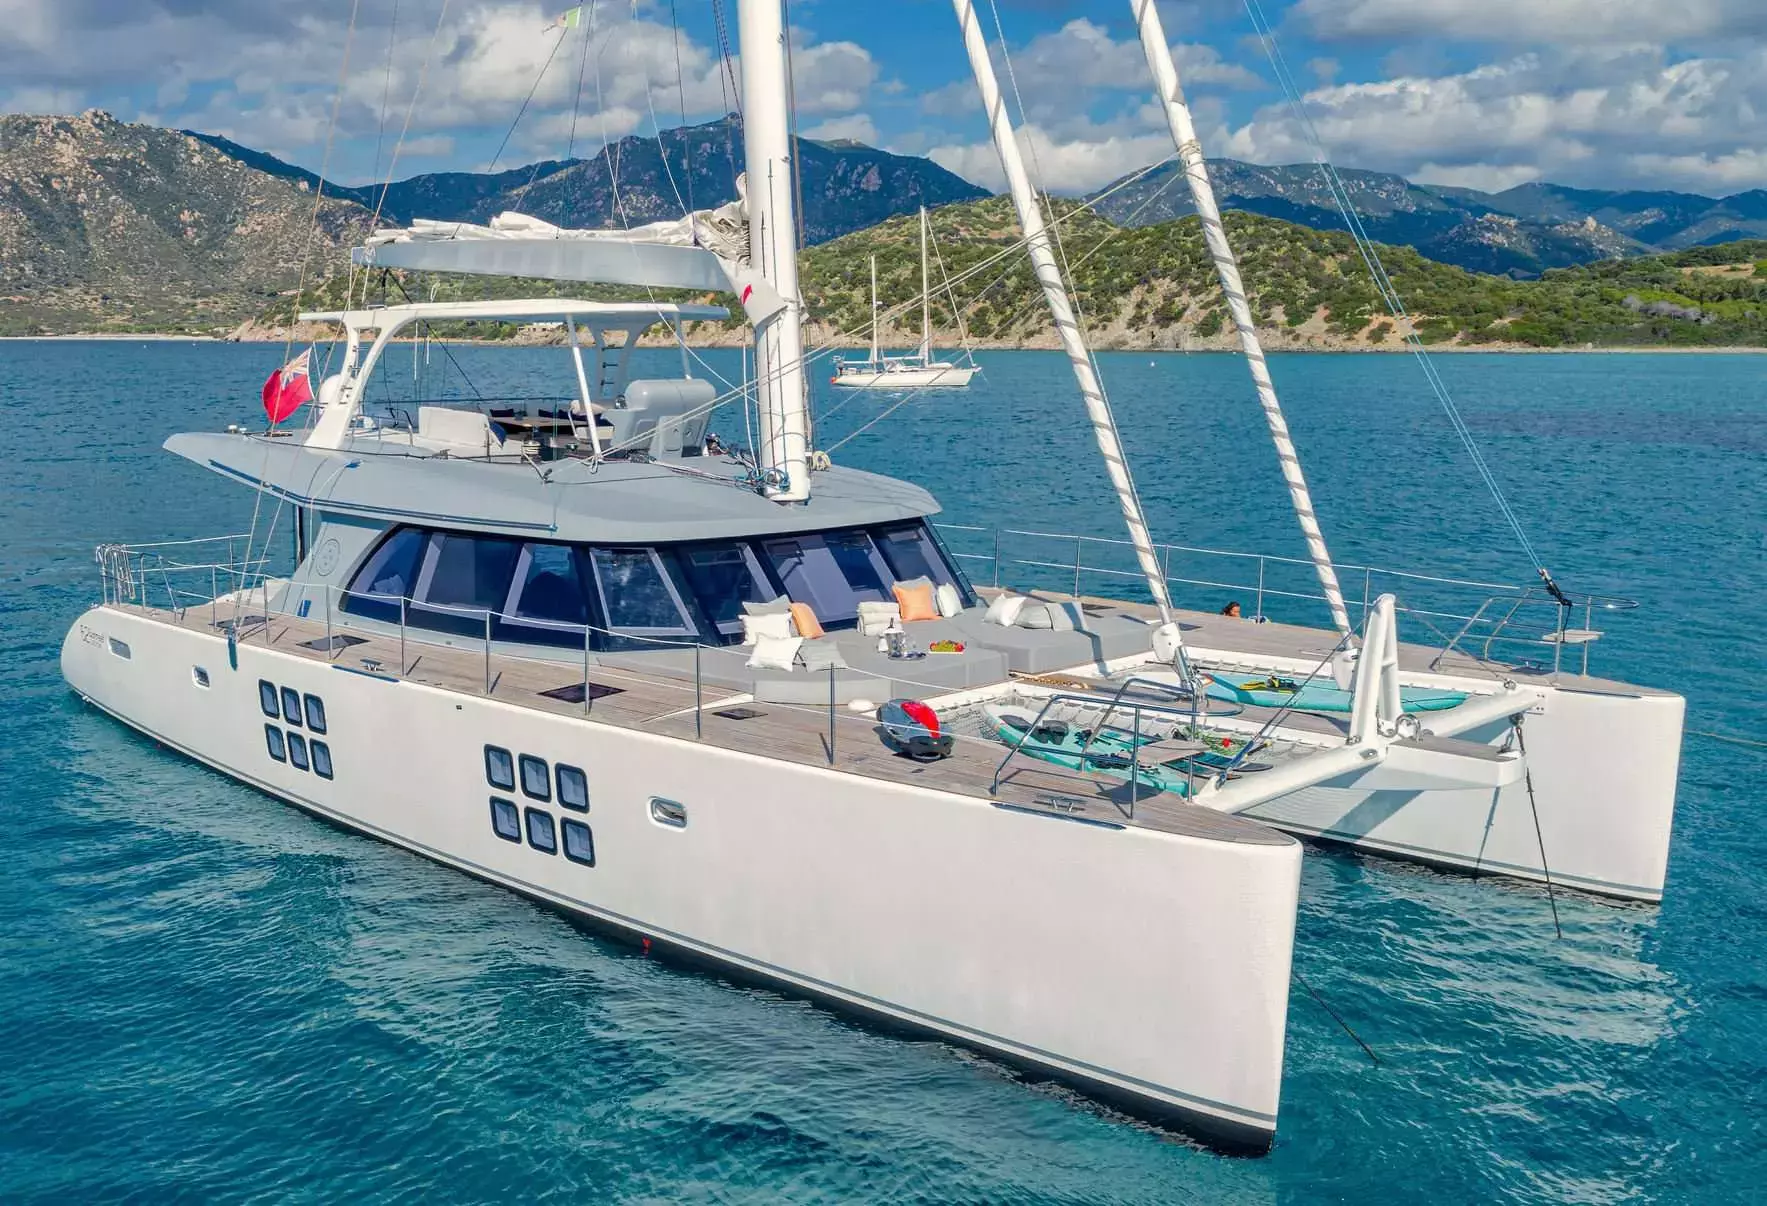 Adea by Sunreef Yachts - Top rates for a Rental of a private Sailing Catamaran in Anguilla